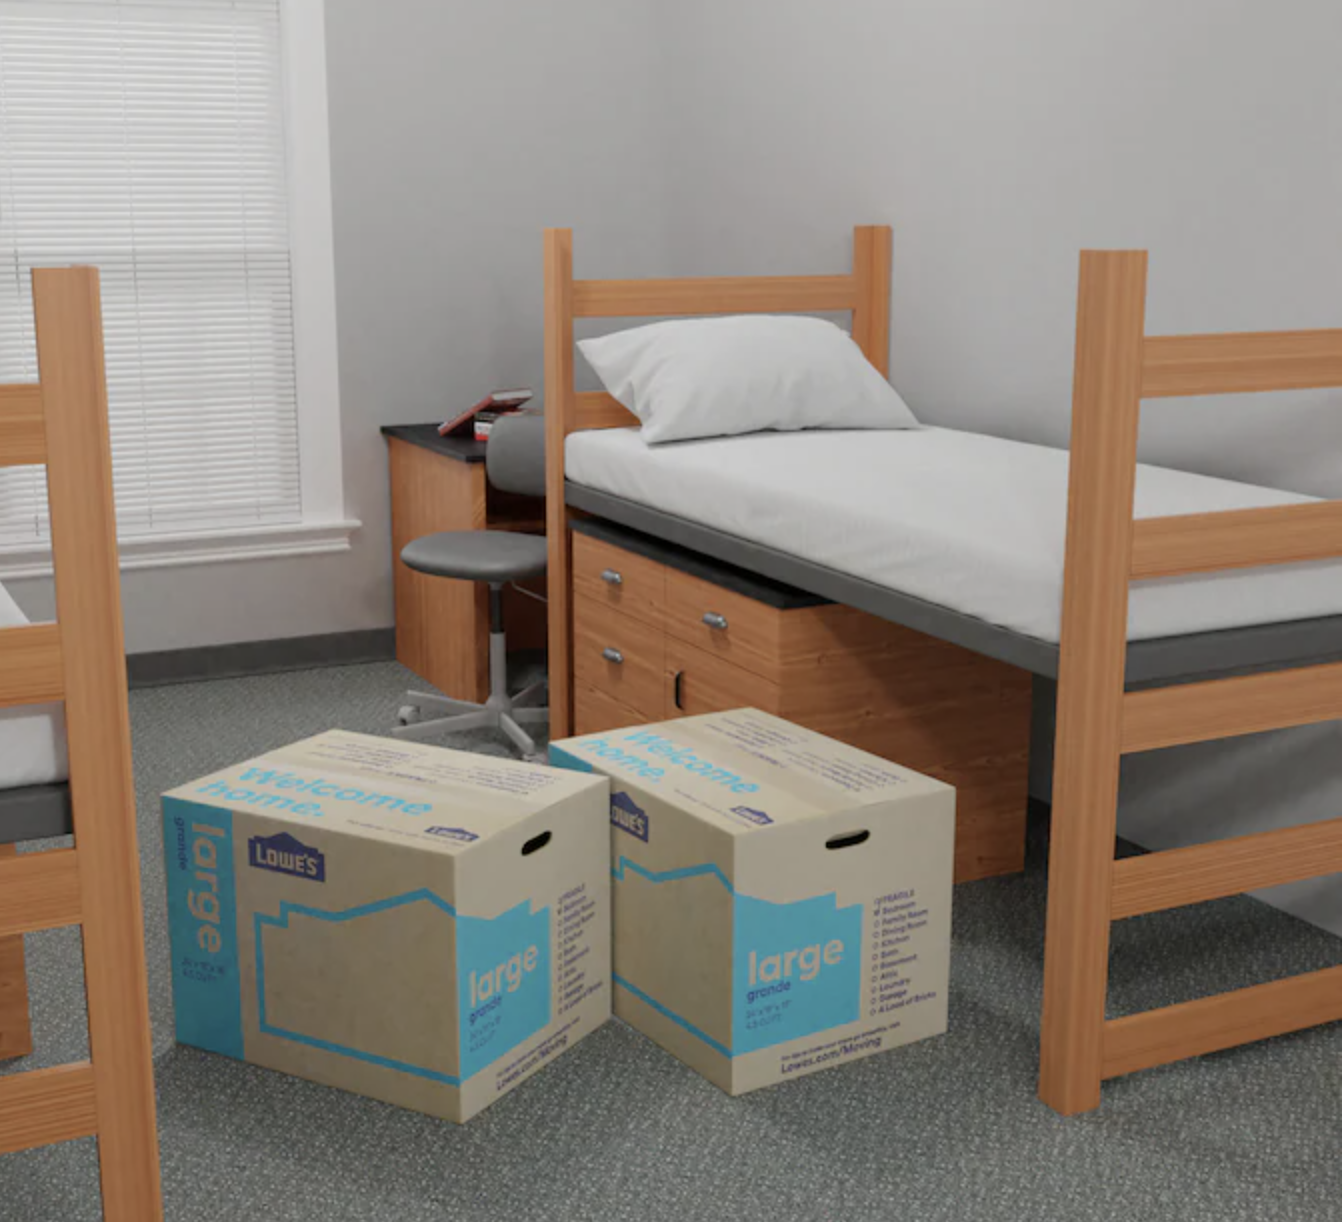 two of the large boxes in a dorm room